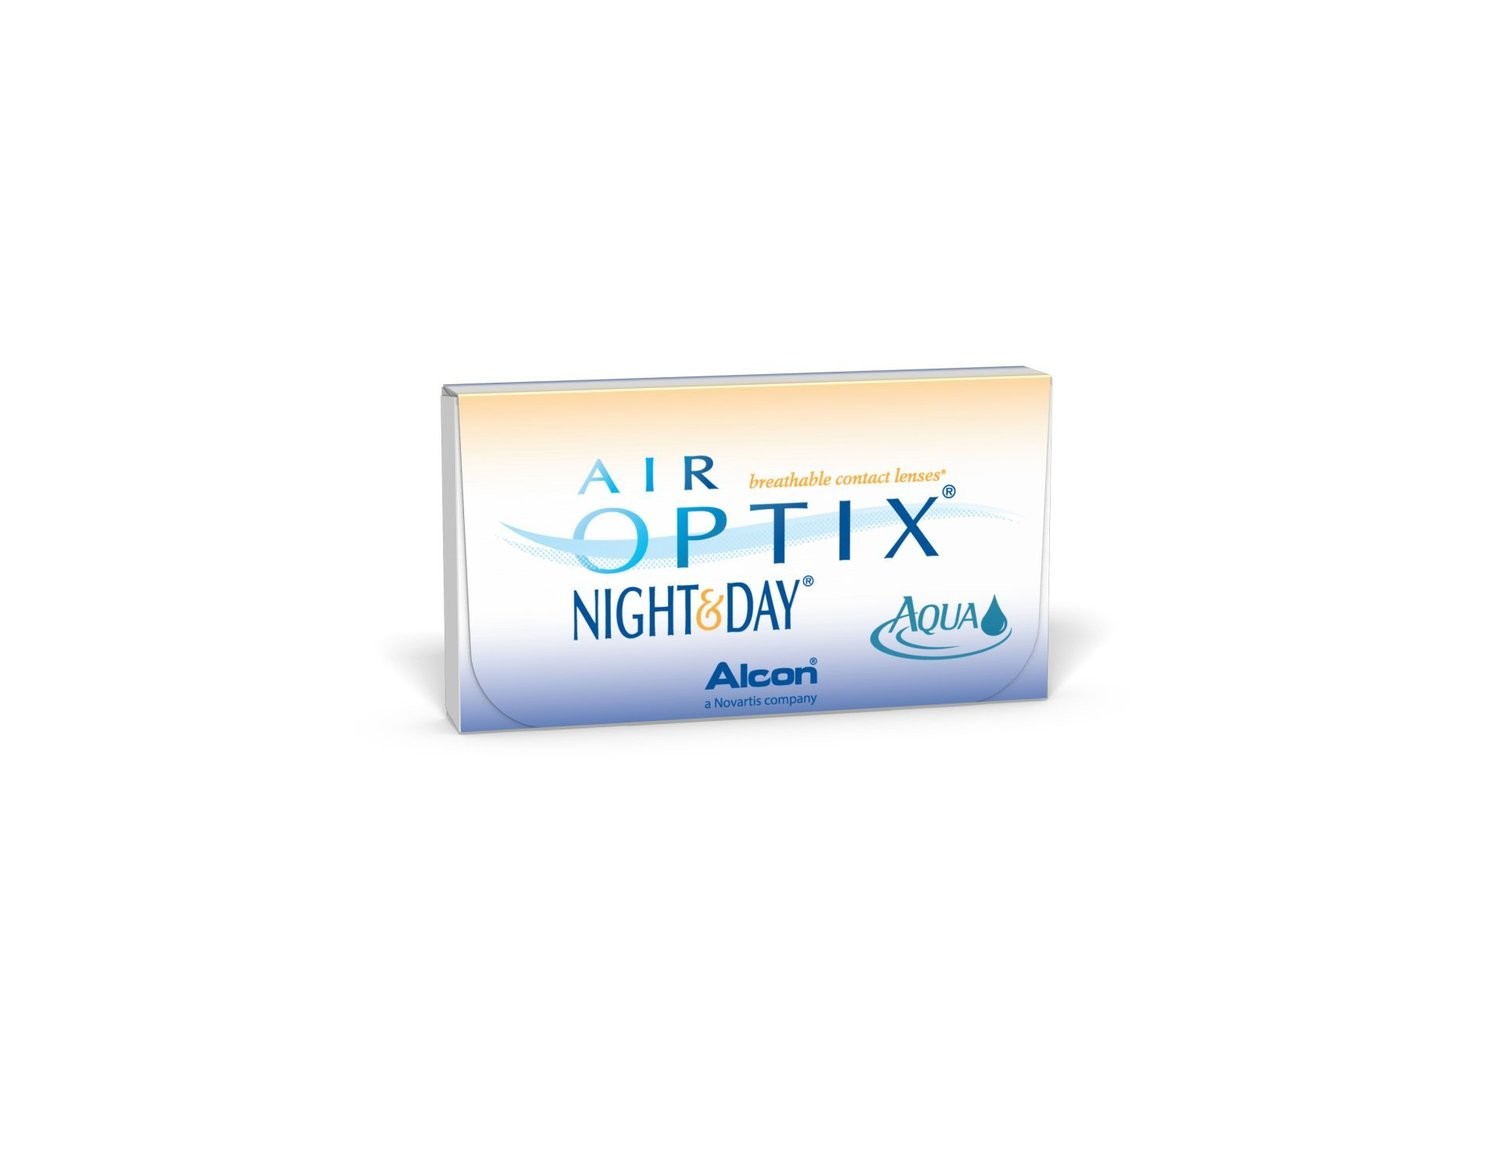 Air Optix Night and Day Aqua (6 pack) by Alcon